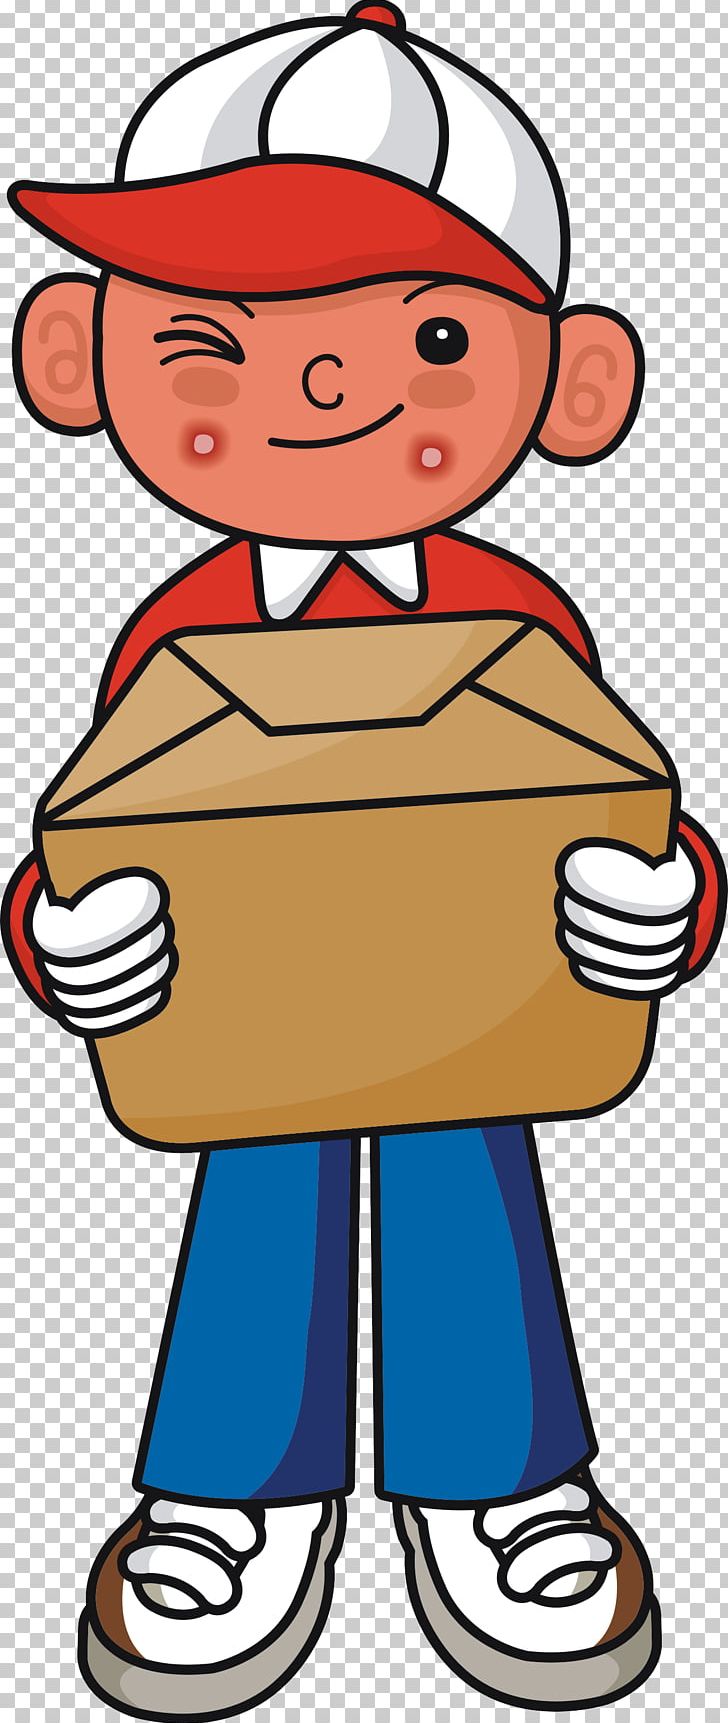 Courier Delivery Logo Parcel PNG, Clipart, Boy, Cartoon, Cartoon Characters, City Silhouette, Delivery Truck Free PNG Download